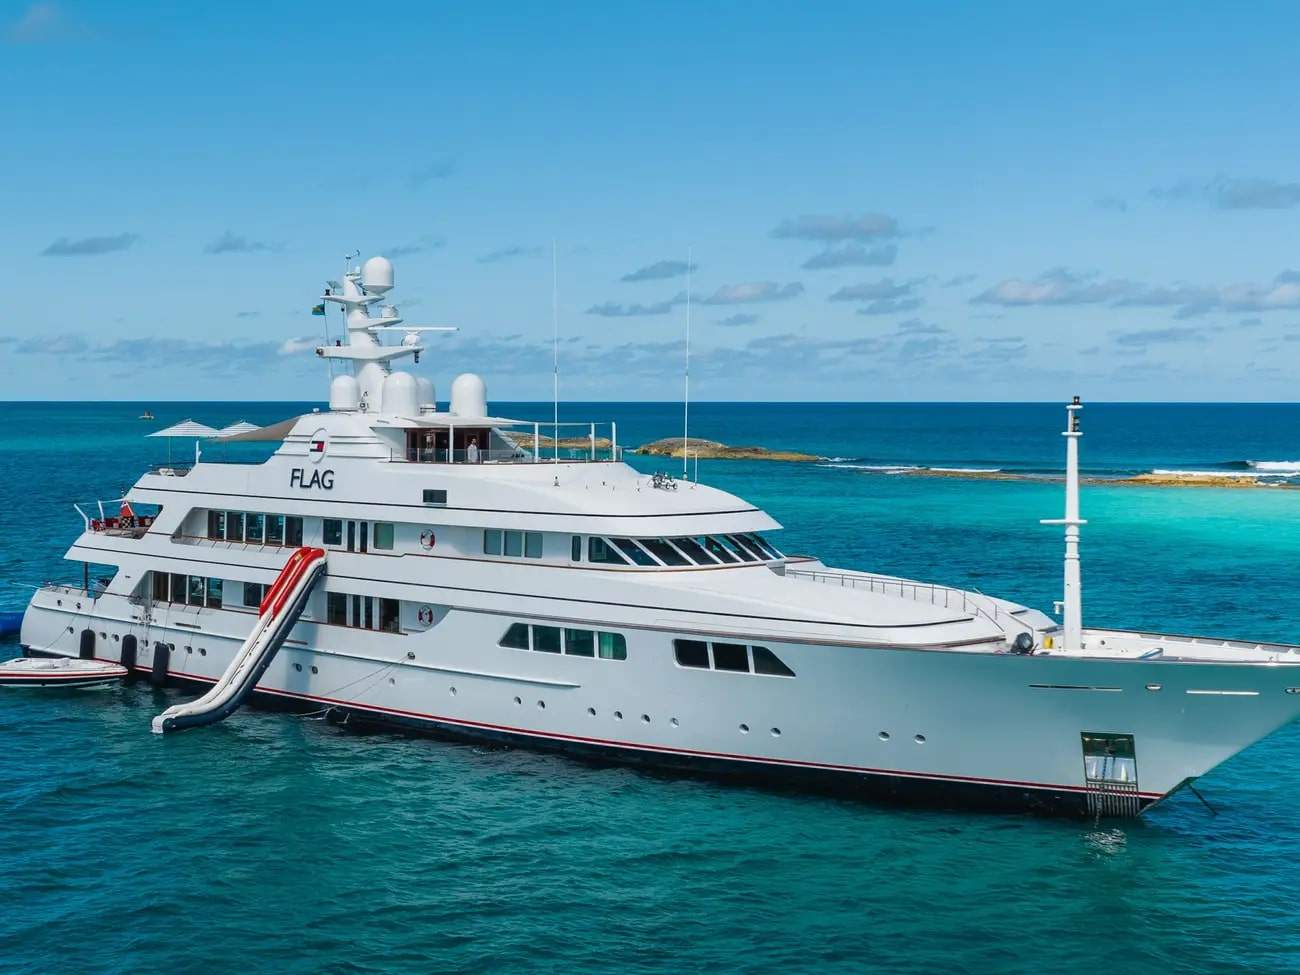 Tommy Hilfiger’s colossal Flag superyacht is a sight to behold. Photo: Michael Ayers